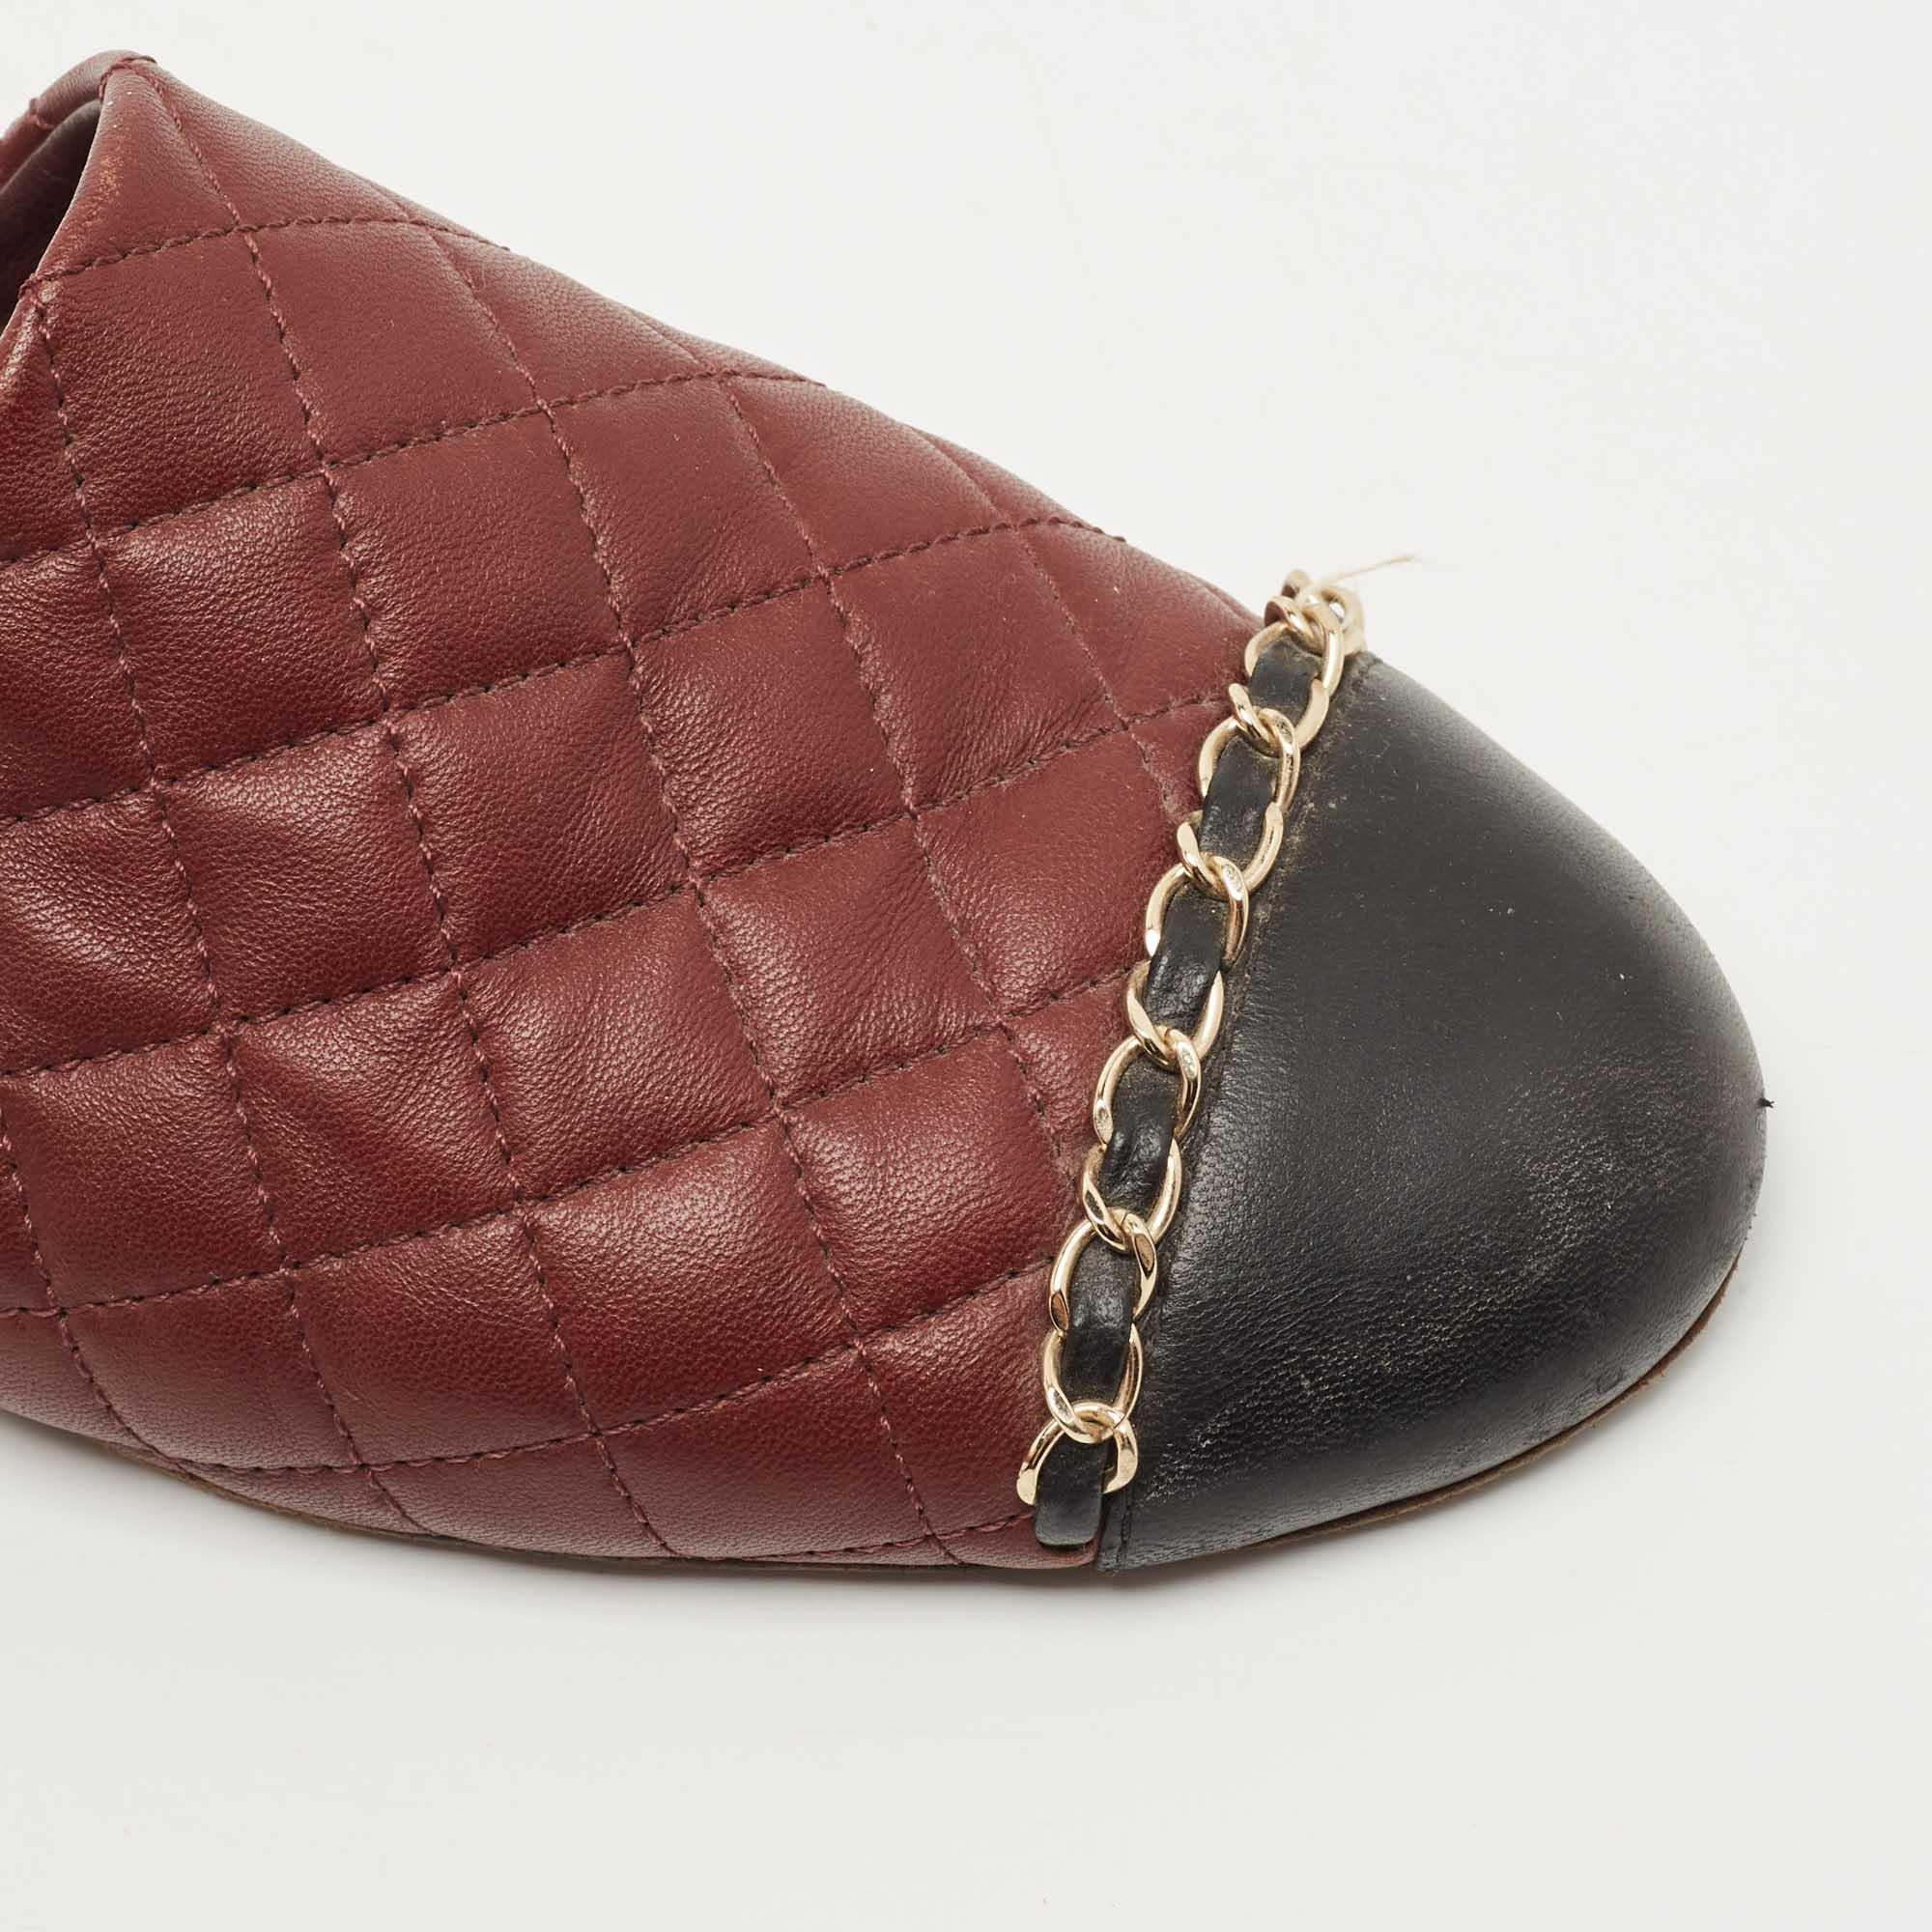 Chanel Burgundy/Black Quilted Leather Chain Detail Mules Size 39.5 1